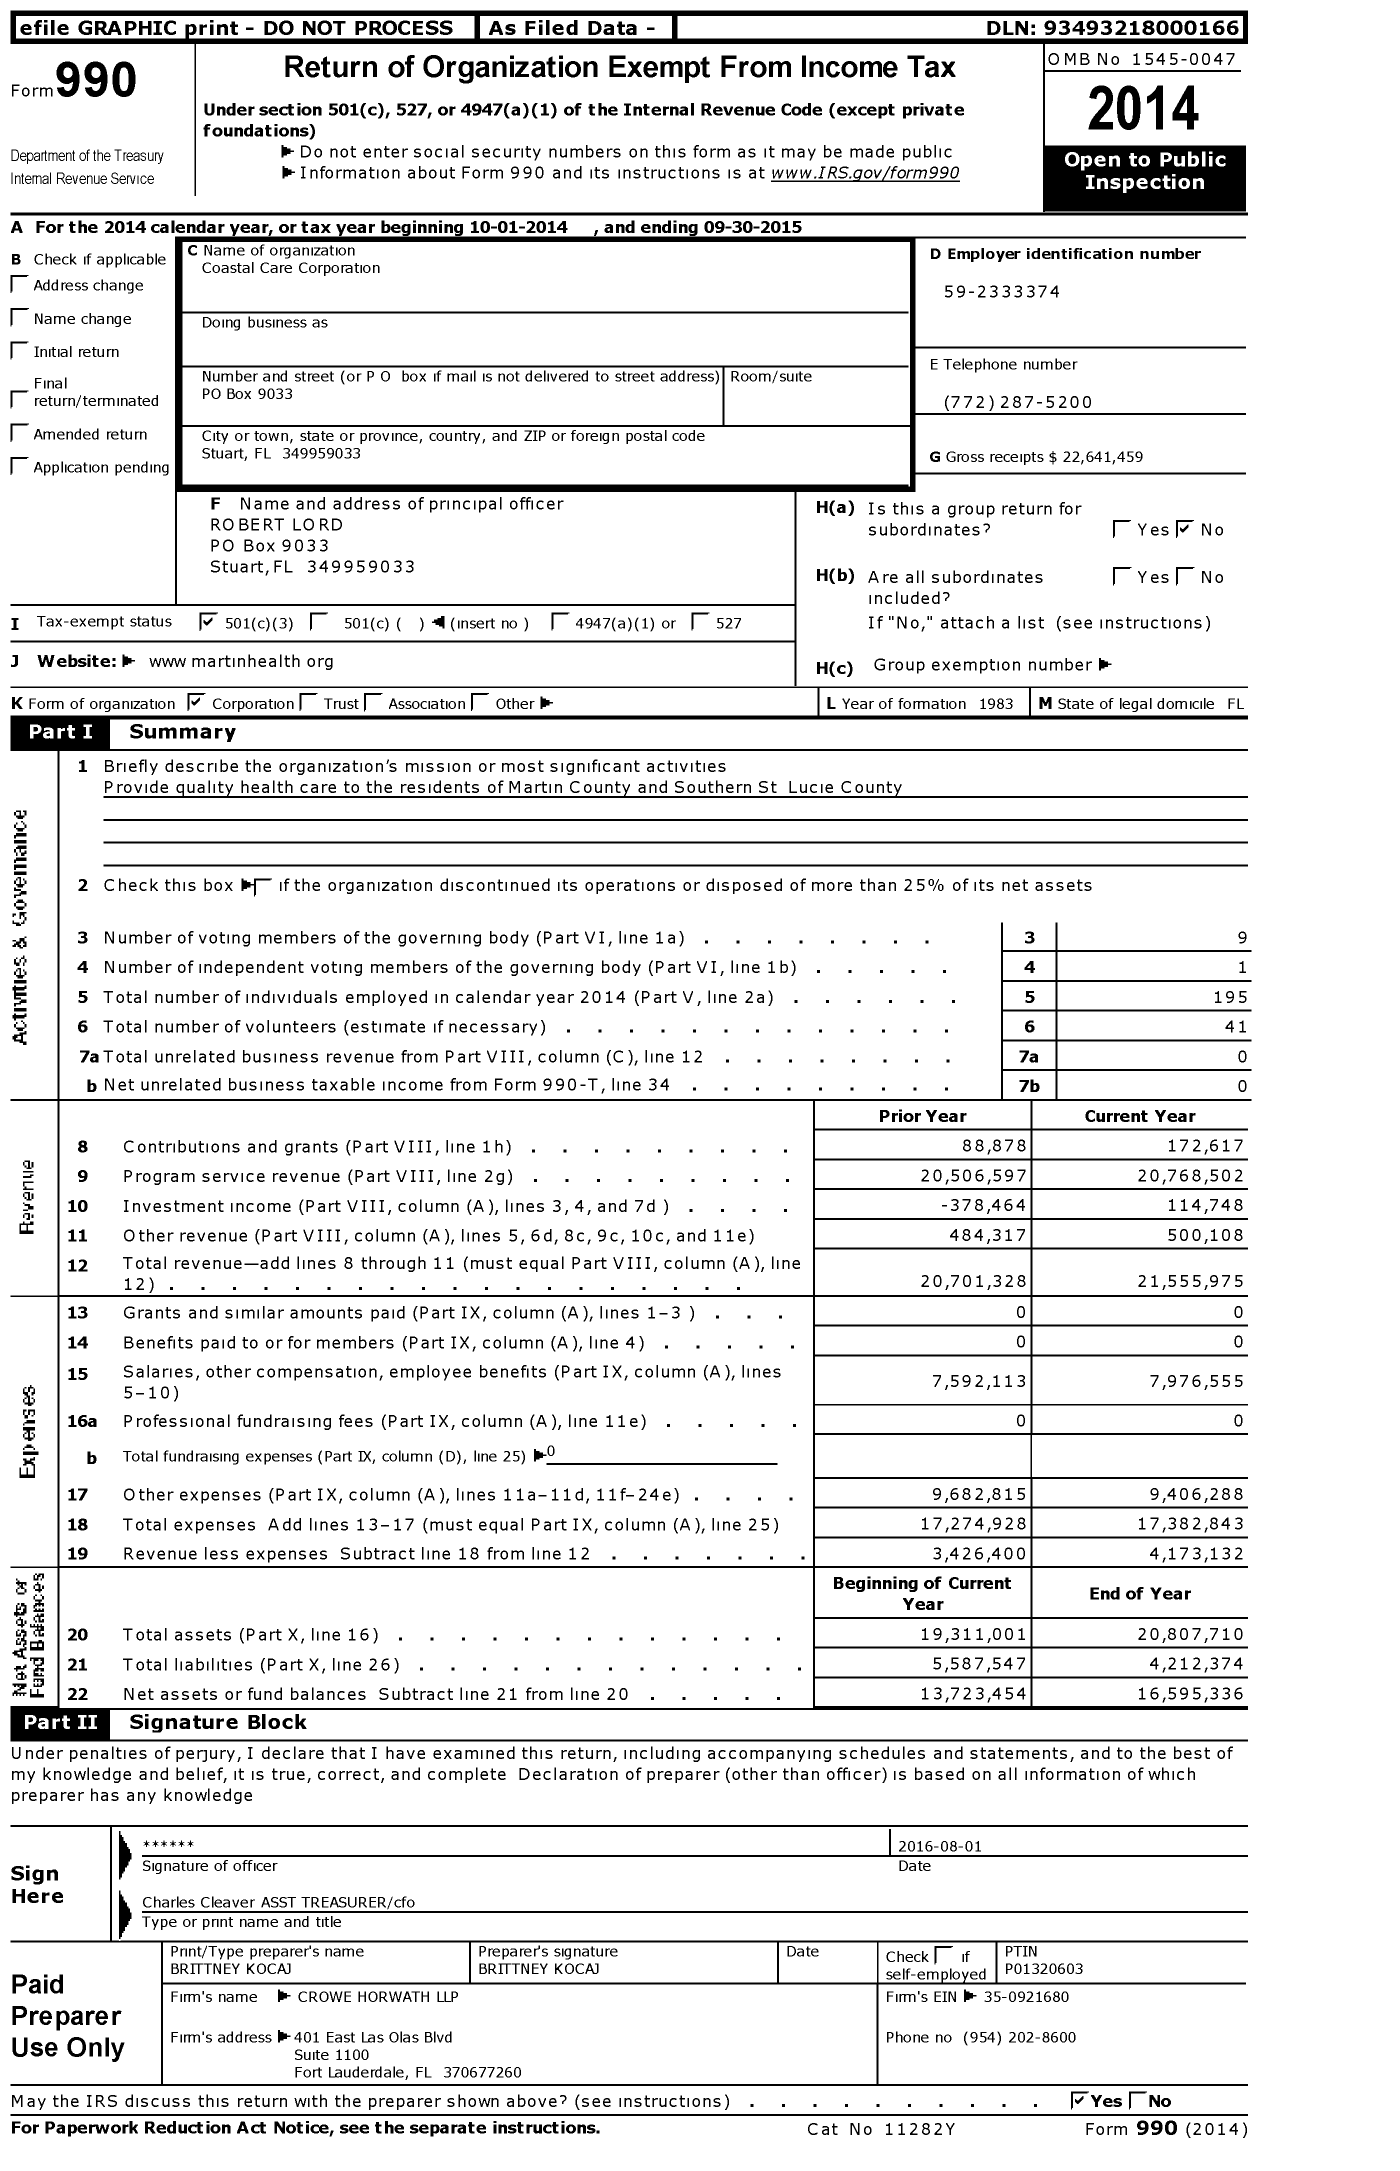 Image of first page of 2014 Form 990 for Coastal Care Corporation